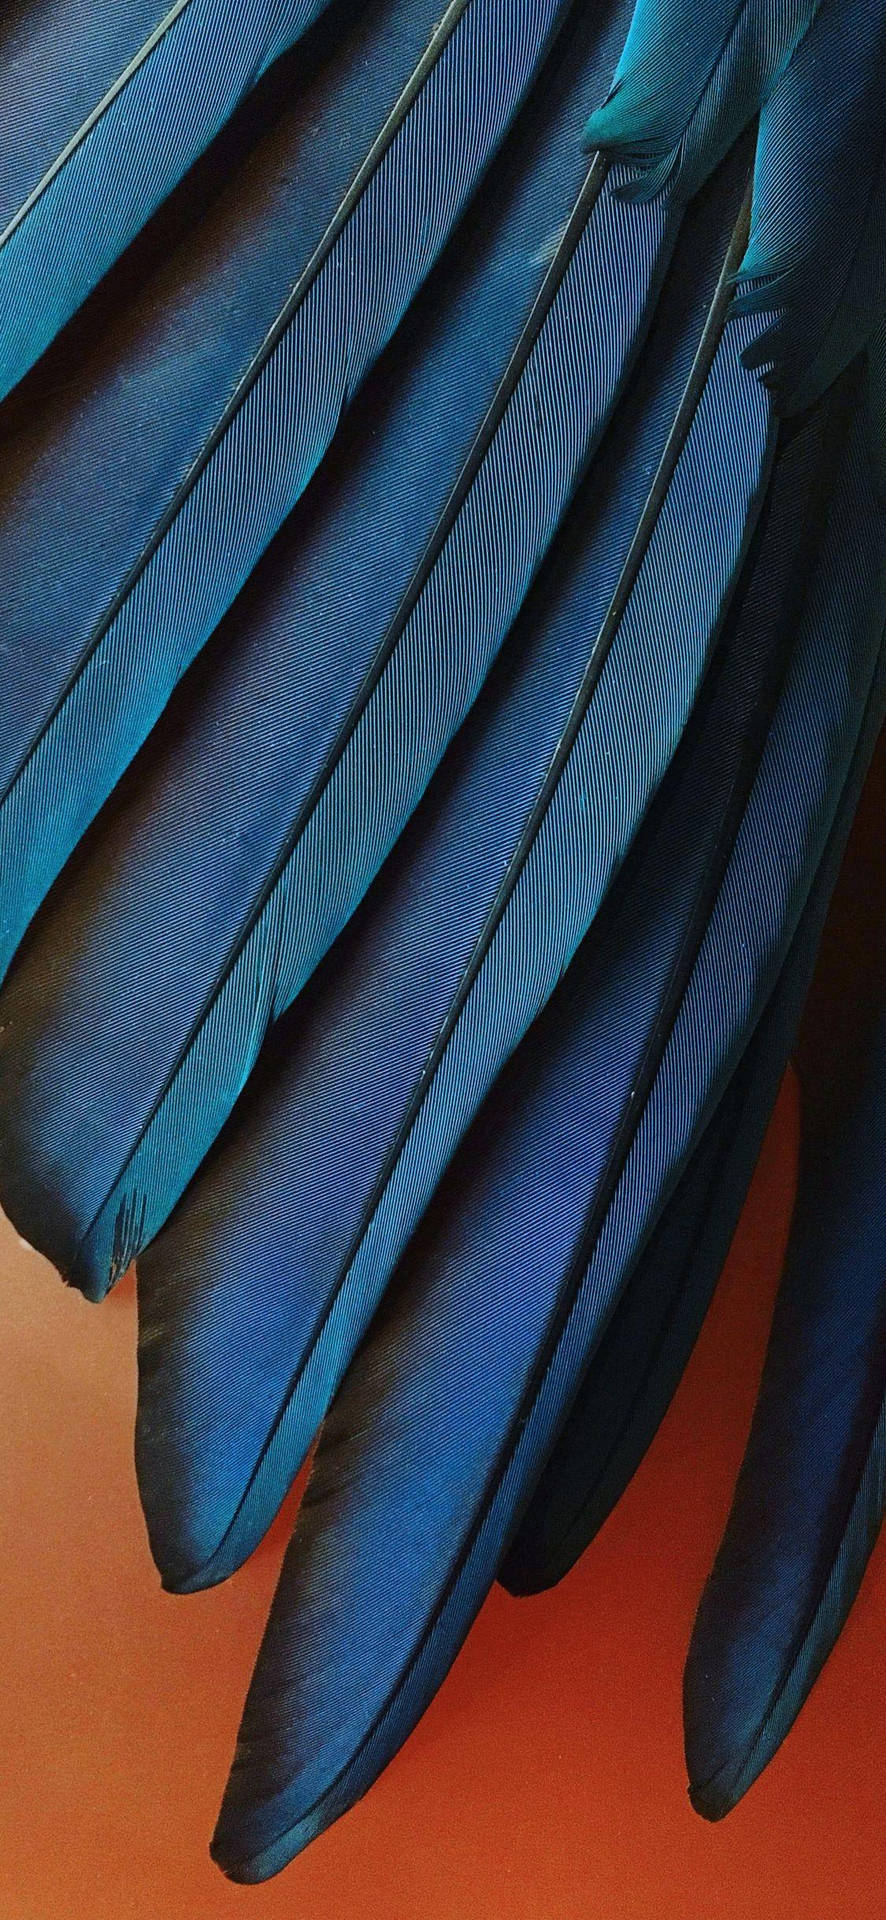 Iphone 12 Pro Blue Feathers Background